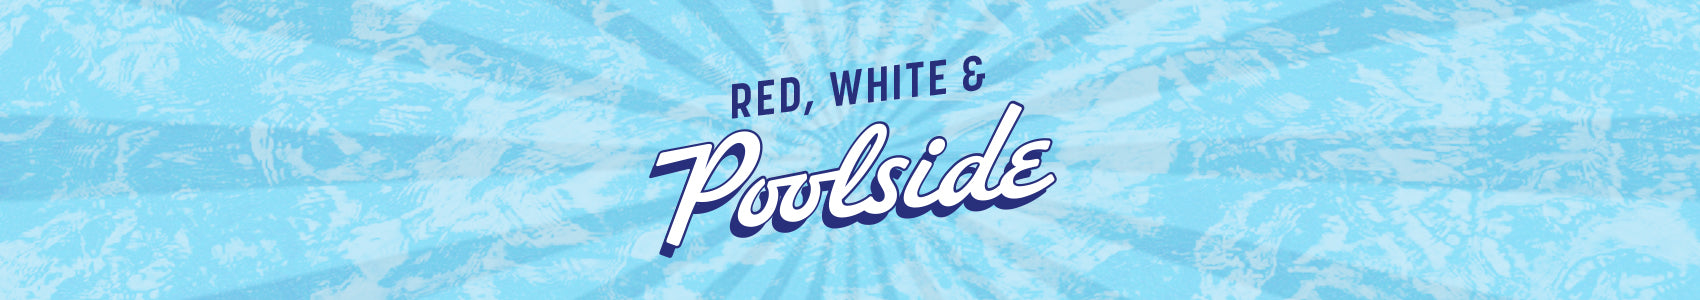 Red, White & Poolside